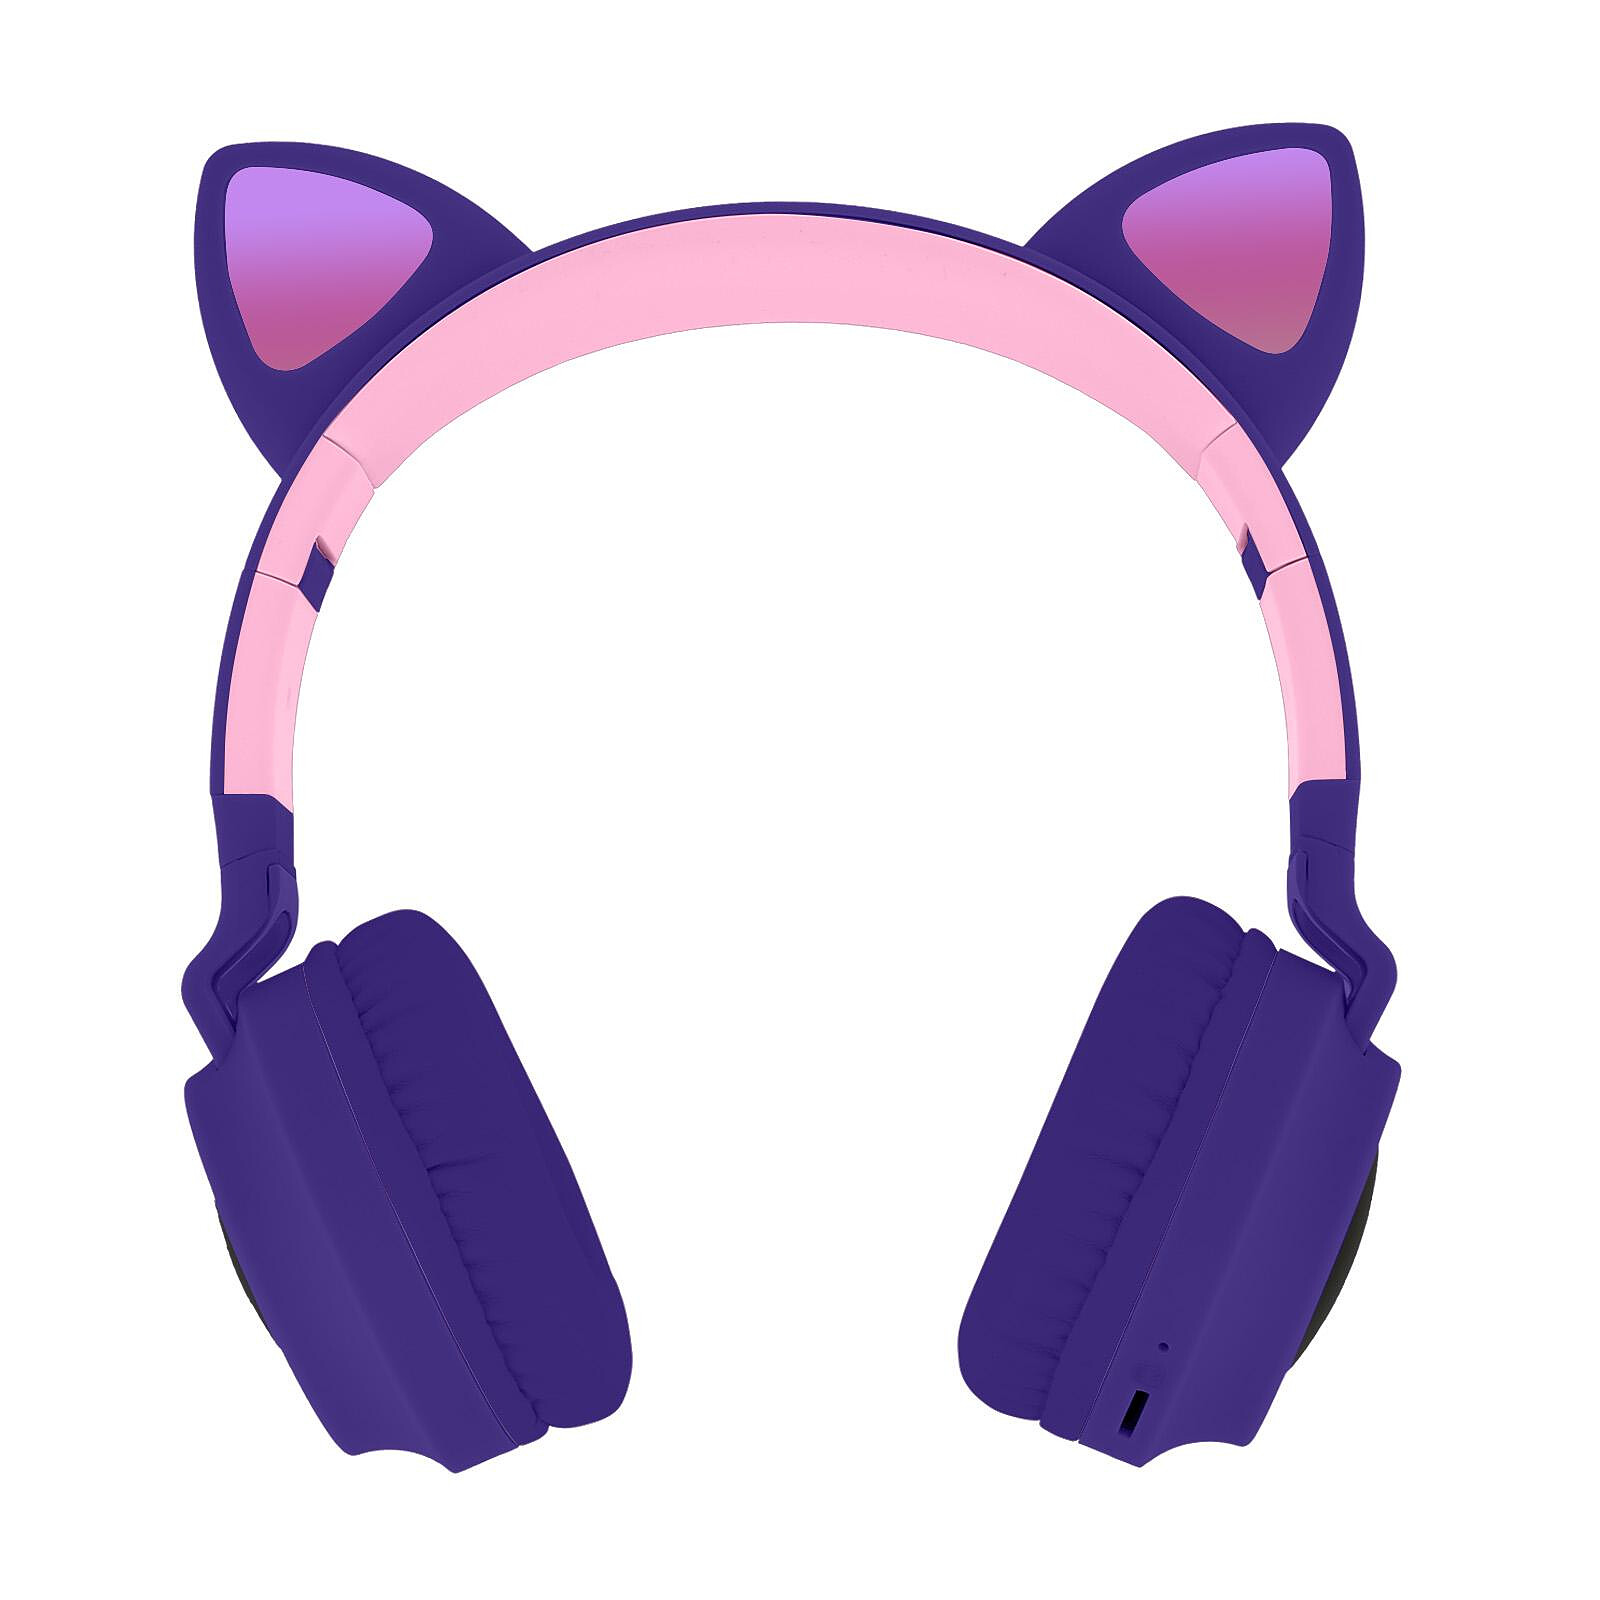 Casque chat kawaii Bluetooth lumineux LED violet